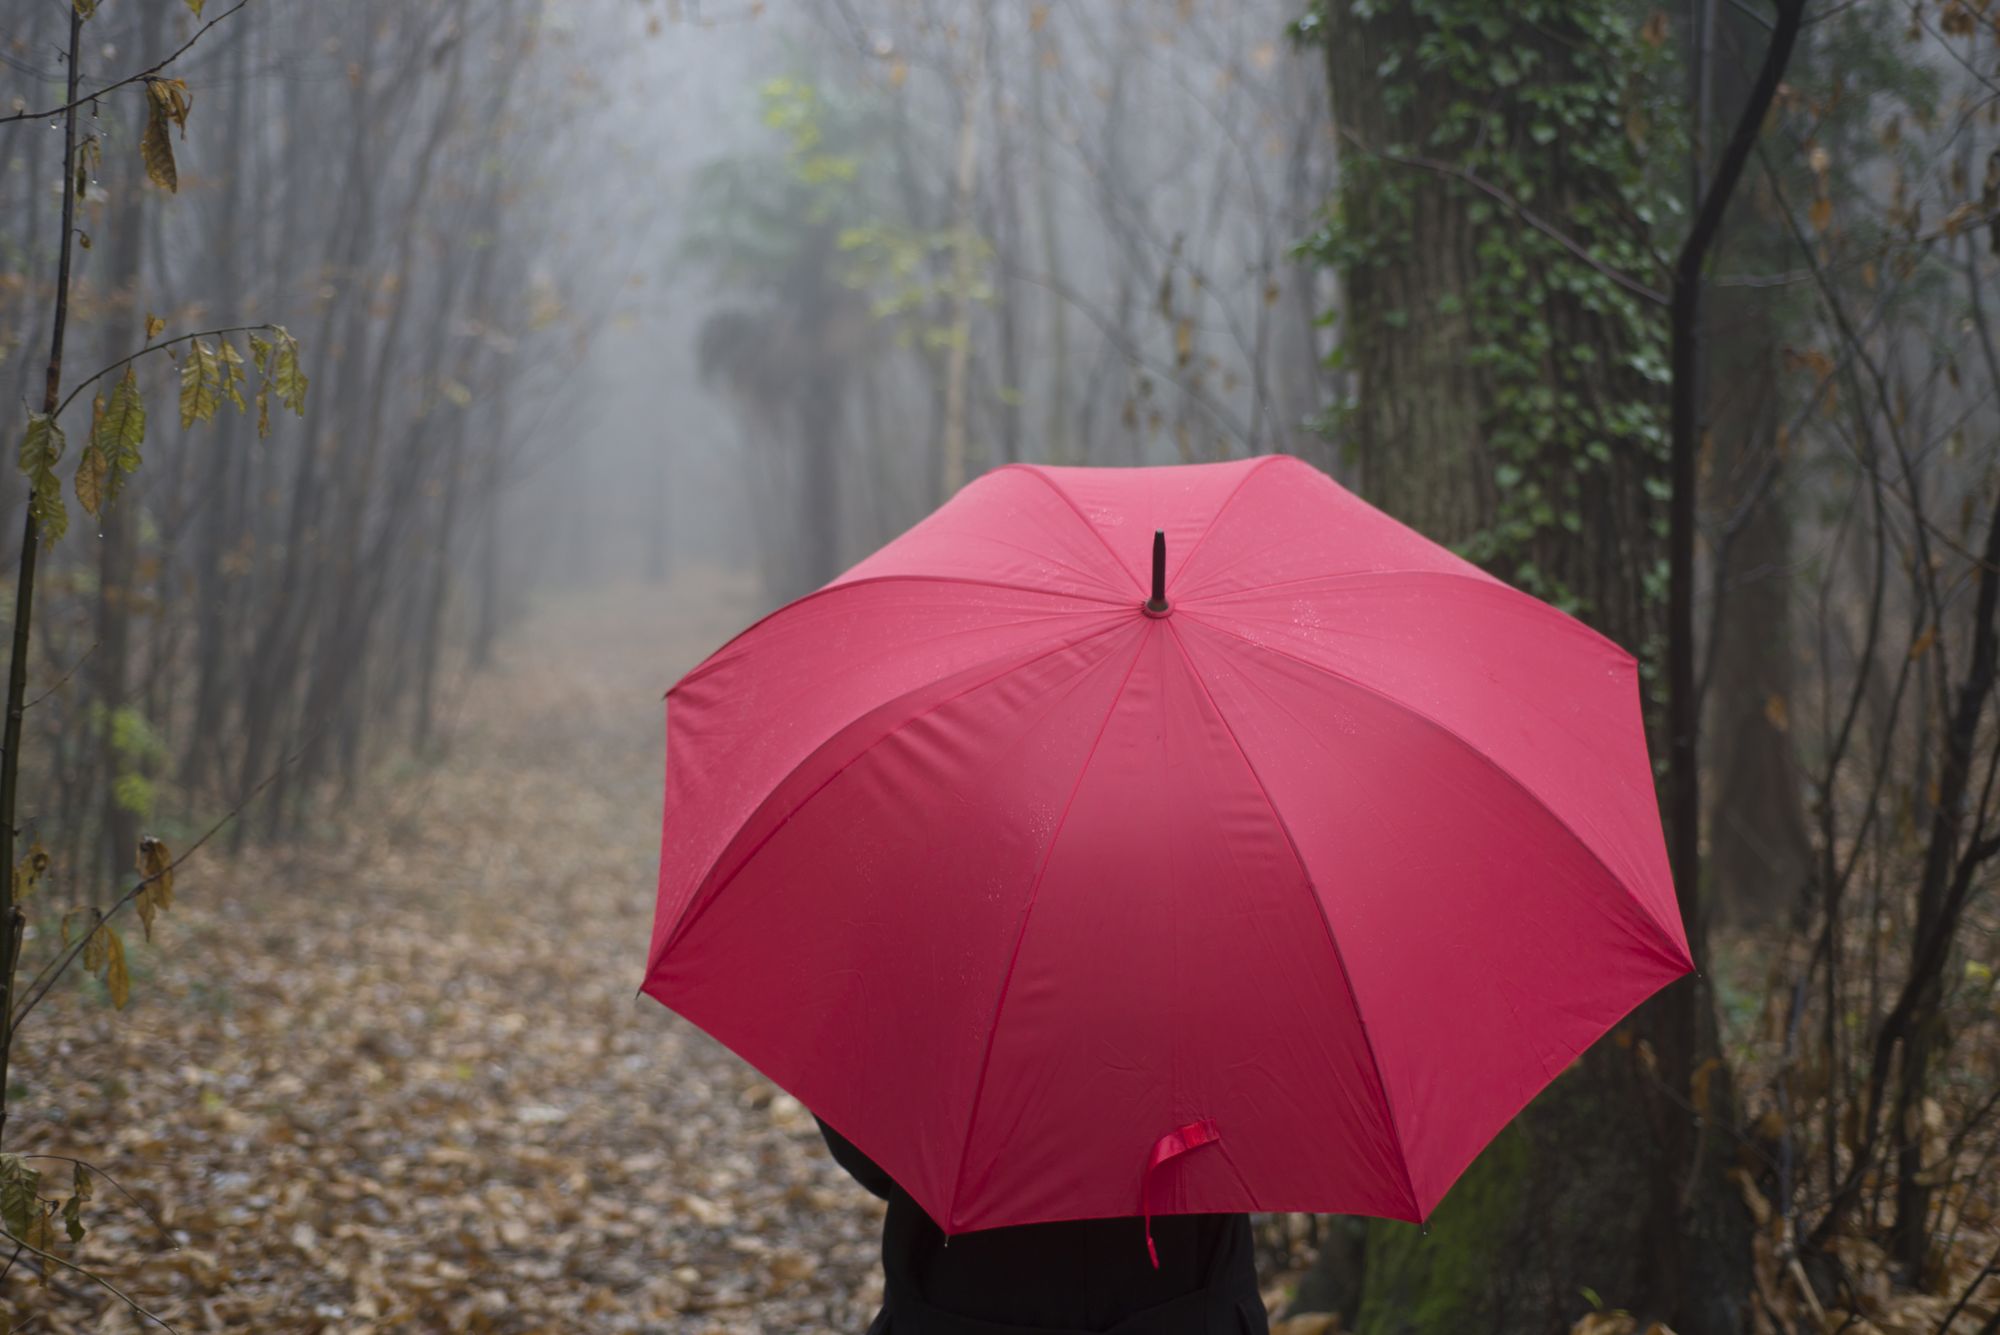 closeup-person-with-red-umbrella-walking-wooded-alley-foggy-day.jpg